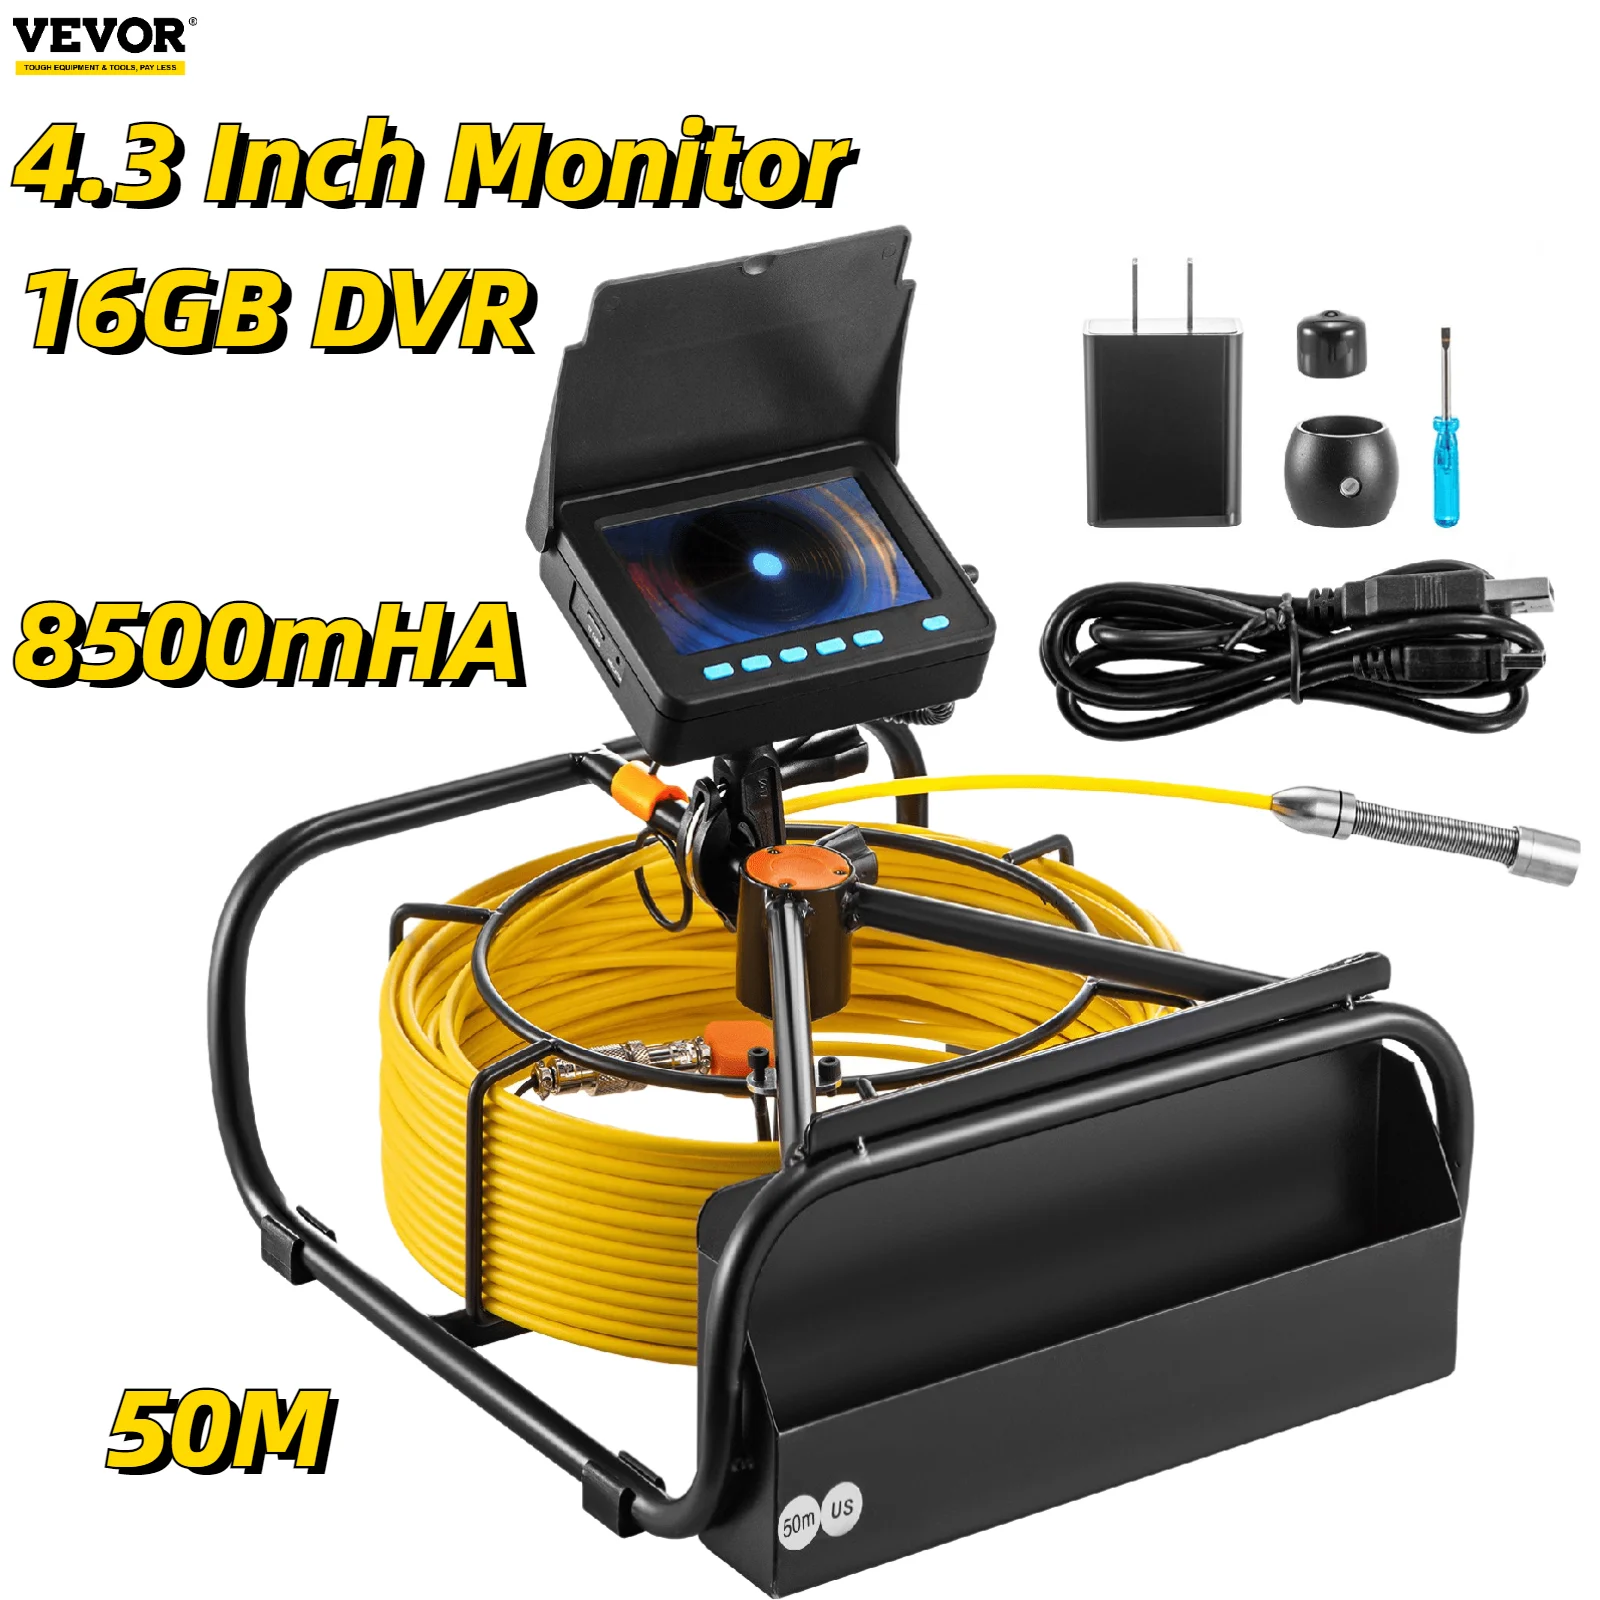 VEVOR Pipe Inspection Camera with DVR 16GB Micro SD Card 4.3in Monitor IP68 8500mHA Battery Sewer Drain Industrial Endoscope 50M cctv monitoring